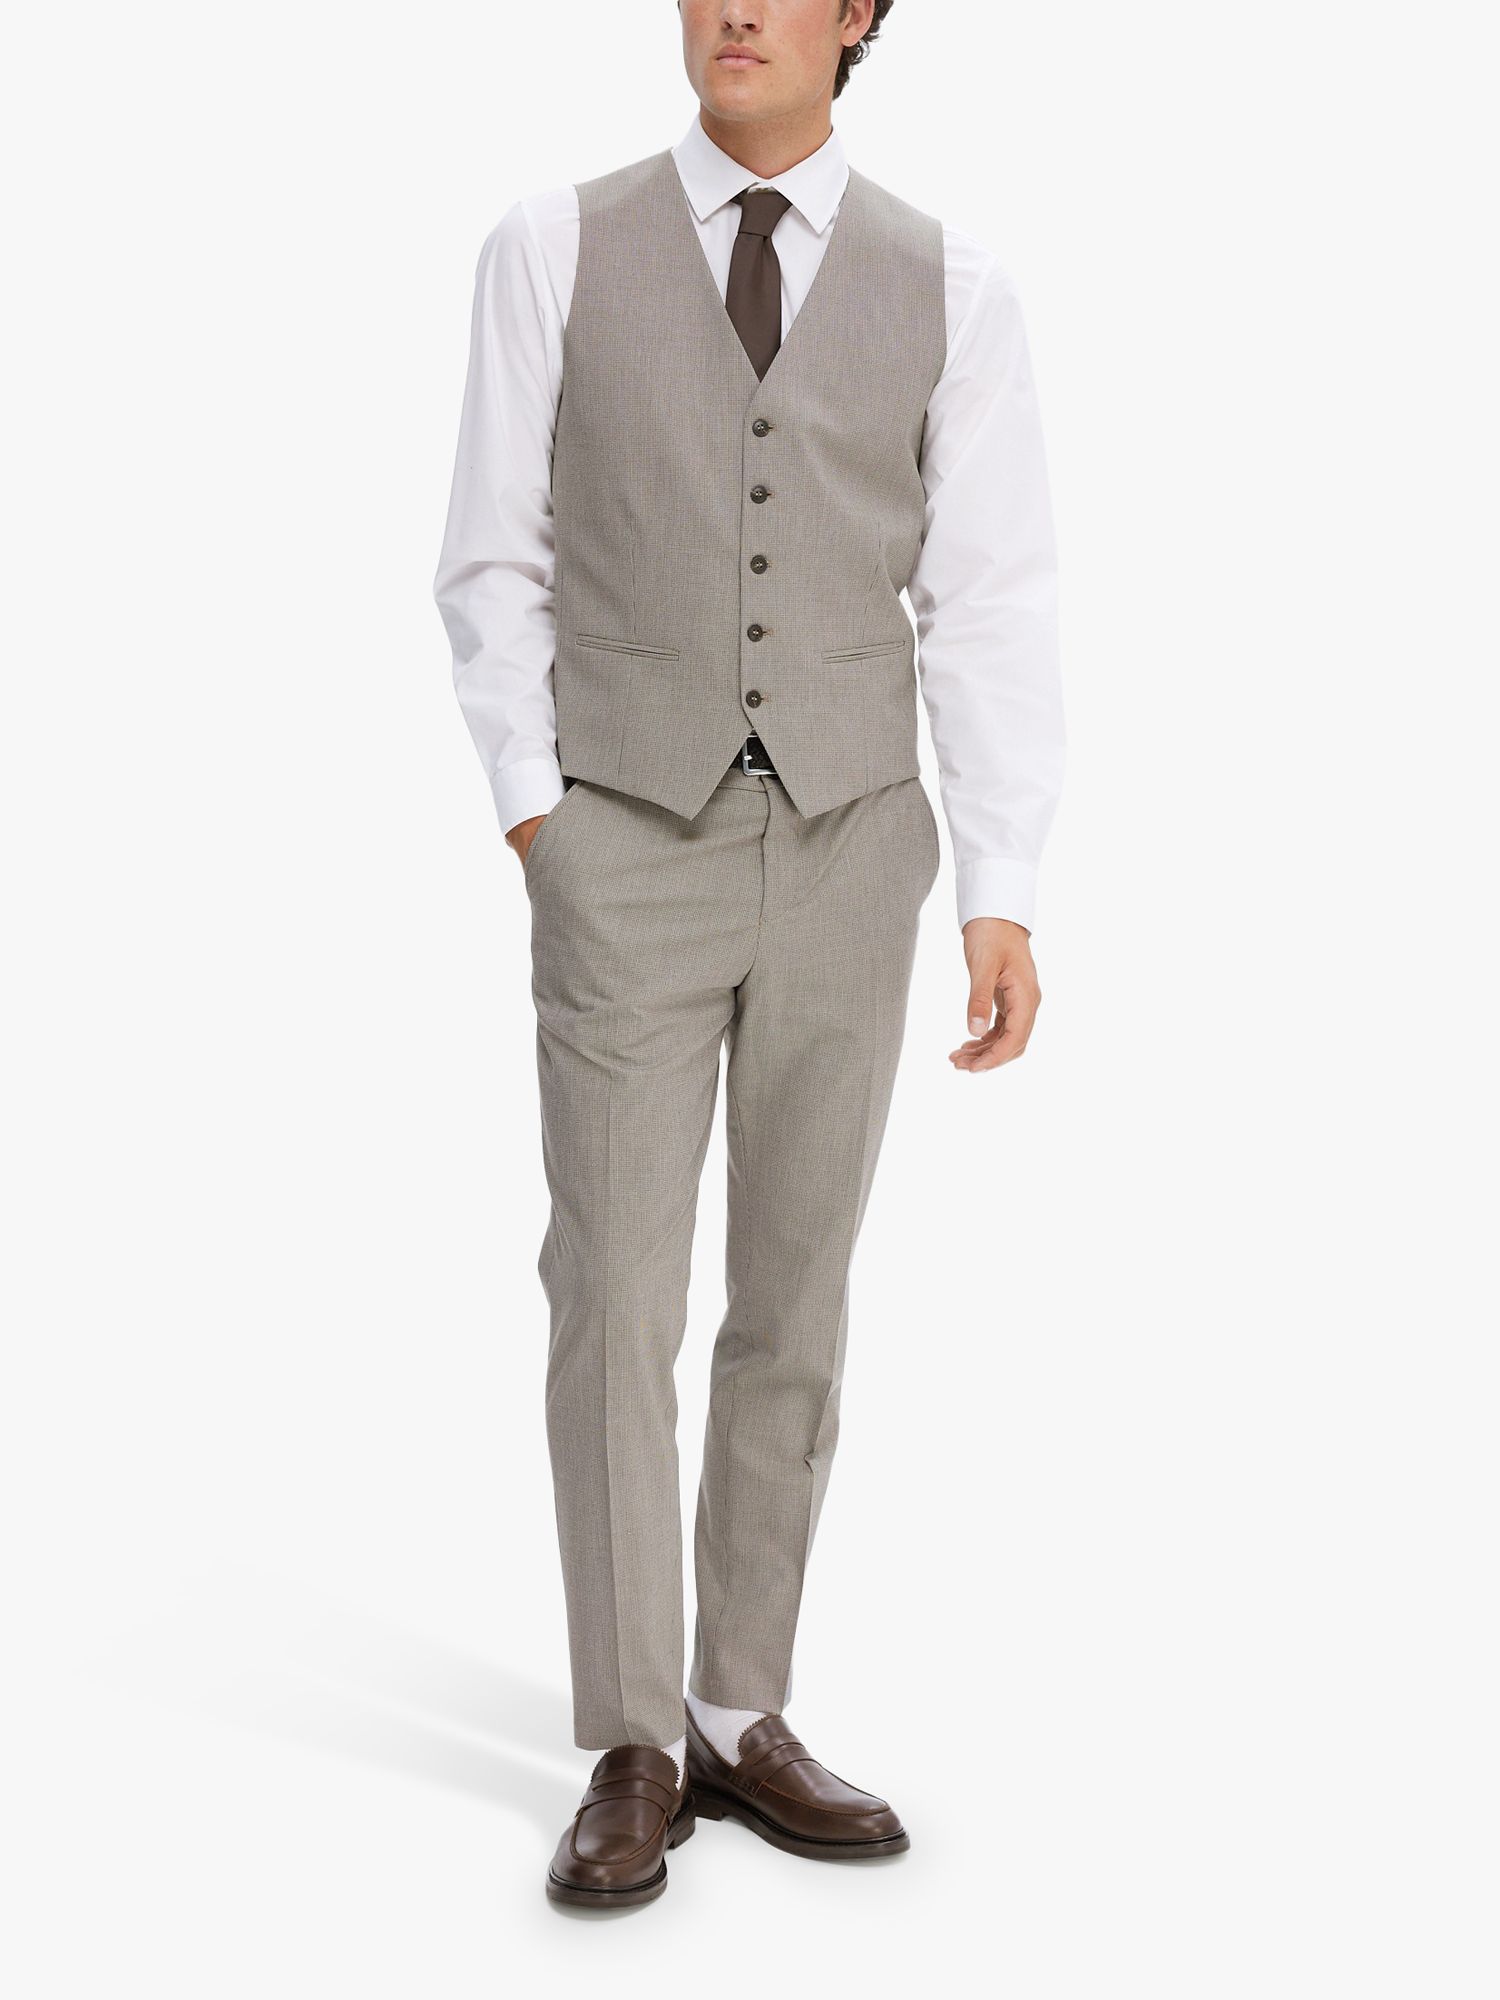 SELECTED HOMME Tailored Fit Waistcoat, Light Brown at John Lewis & Partners